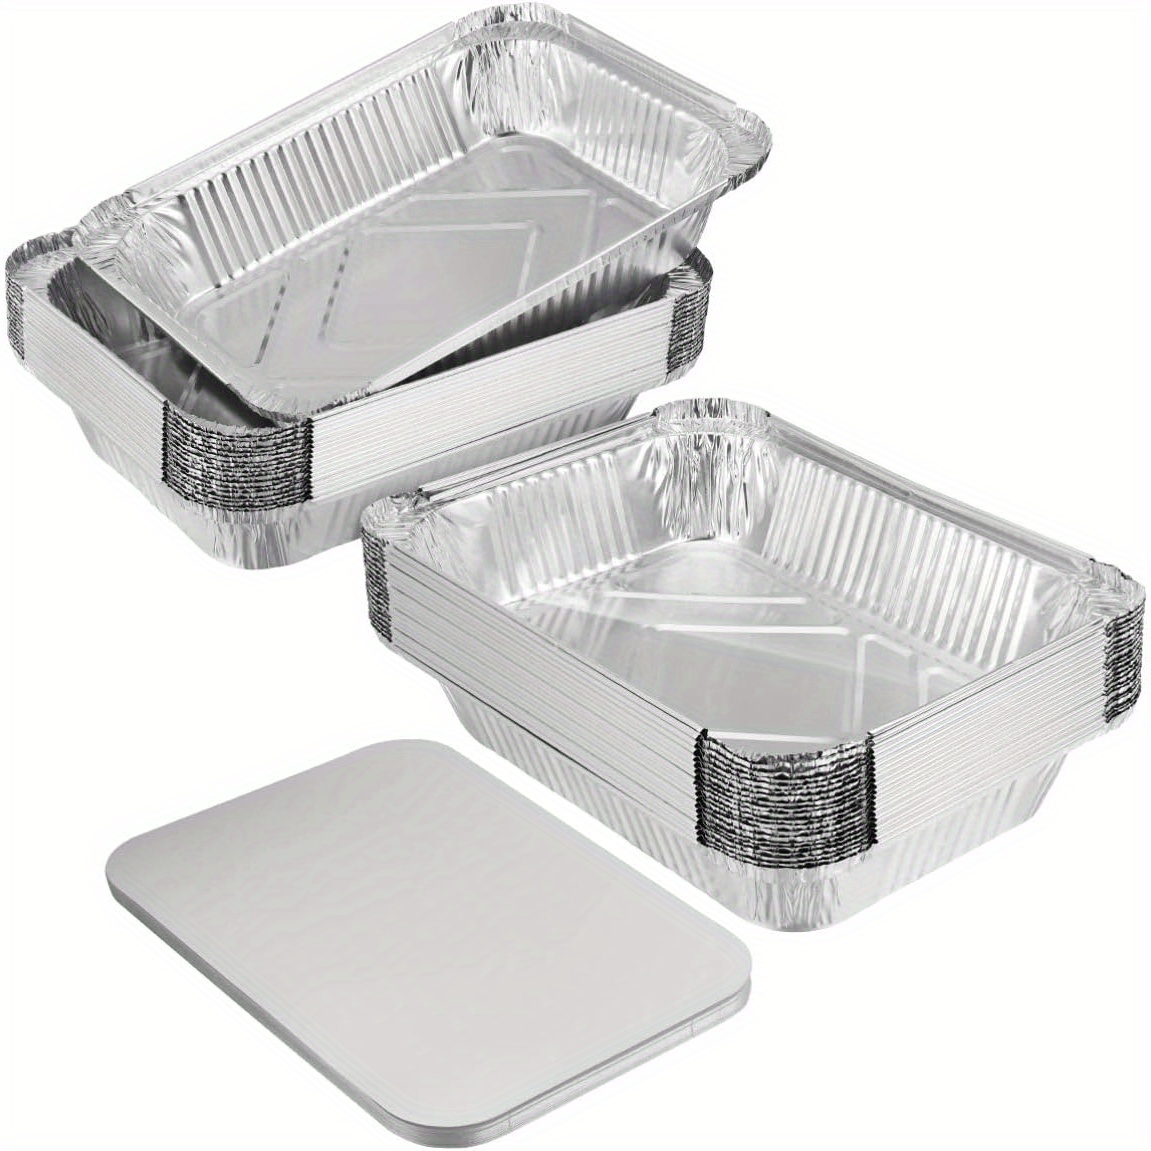 

20 Pieces Heavy Thickening Aluminum Foil Pan With Band Plate Lid, Suitable For Cooking, Baking, Baking-22.9x43. 1x4.6cm